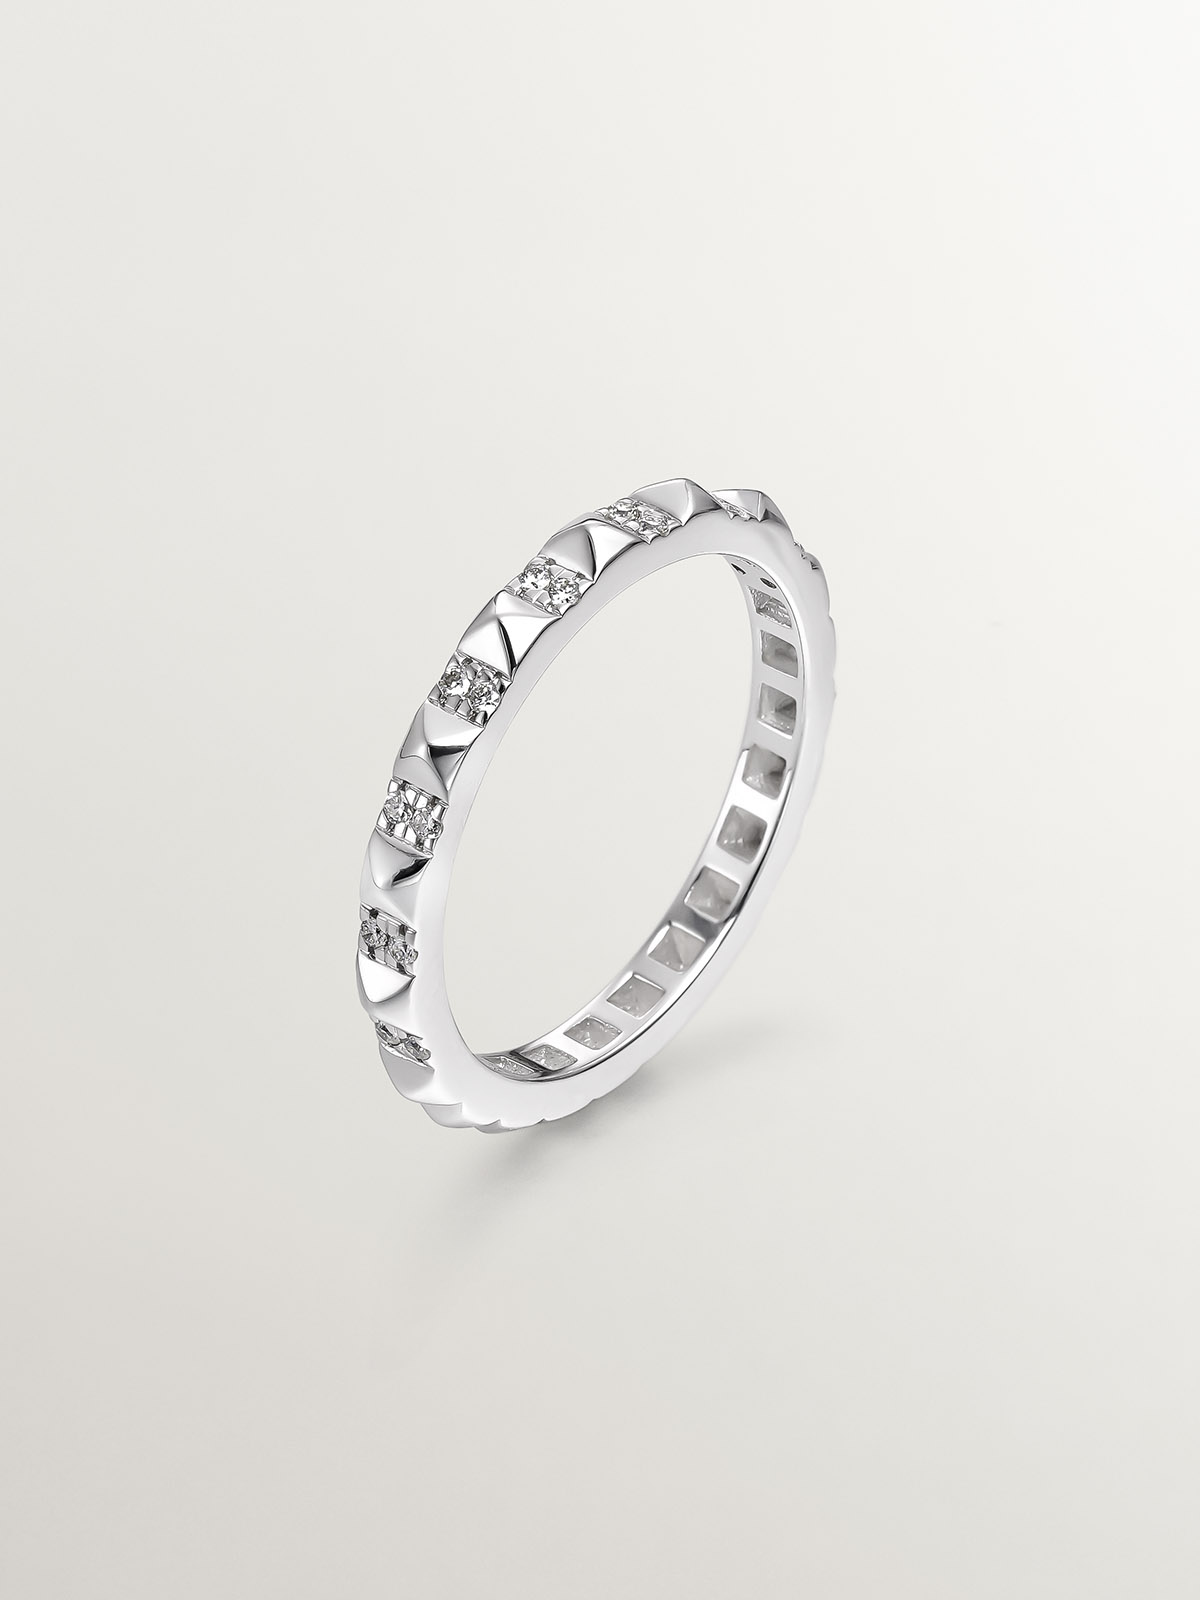 18K white gold ring with white diamonds and studs